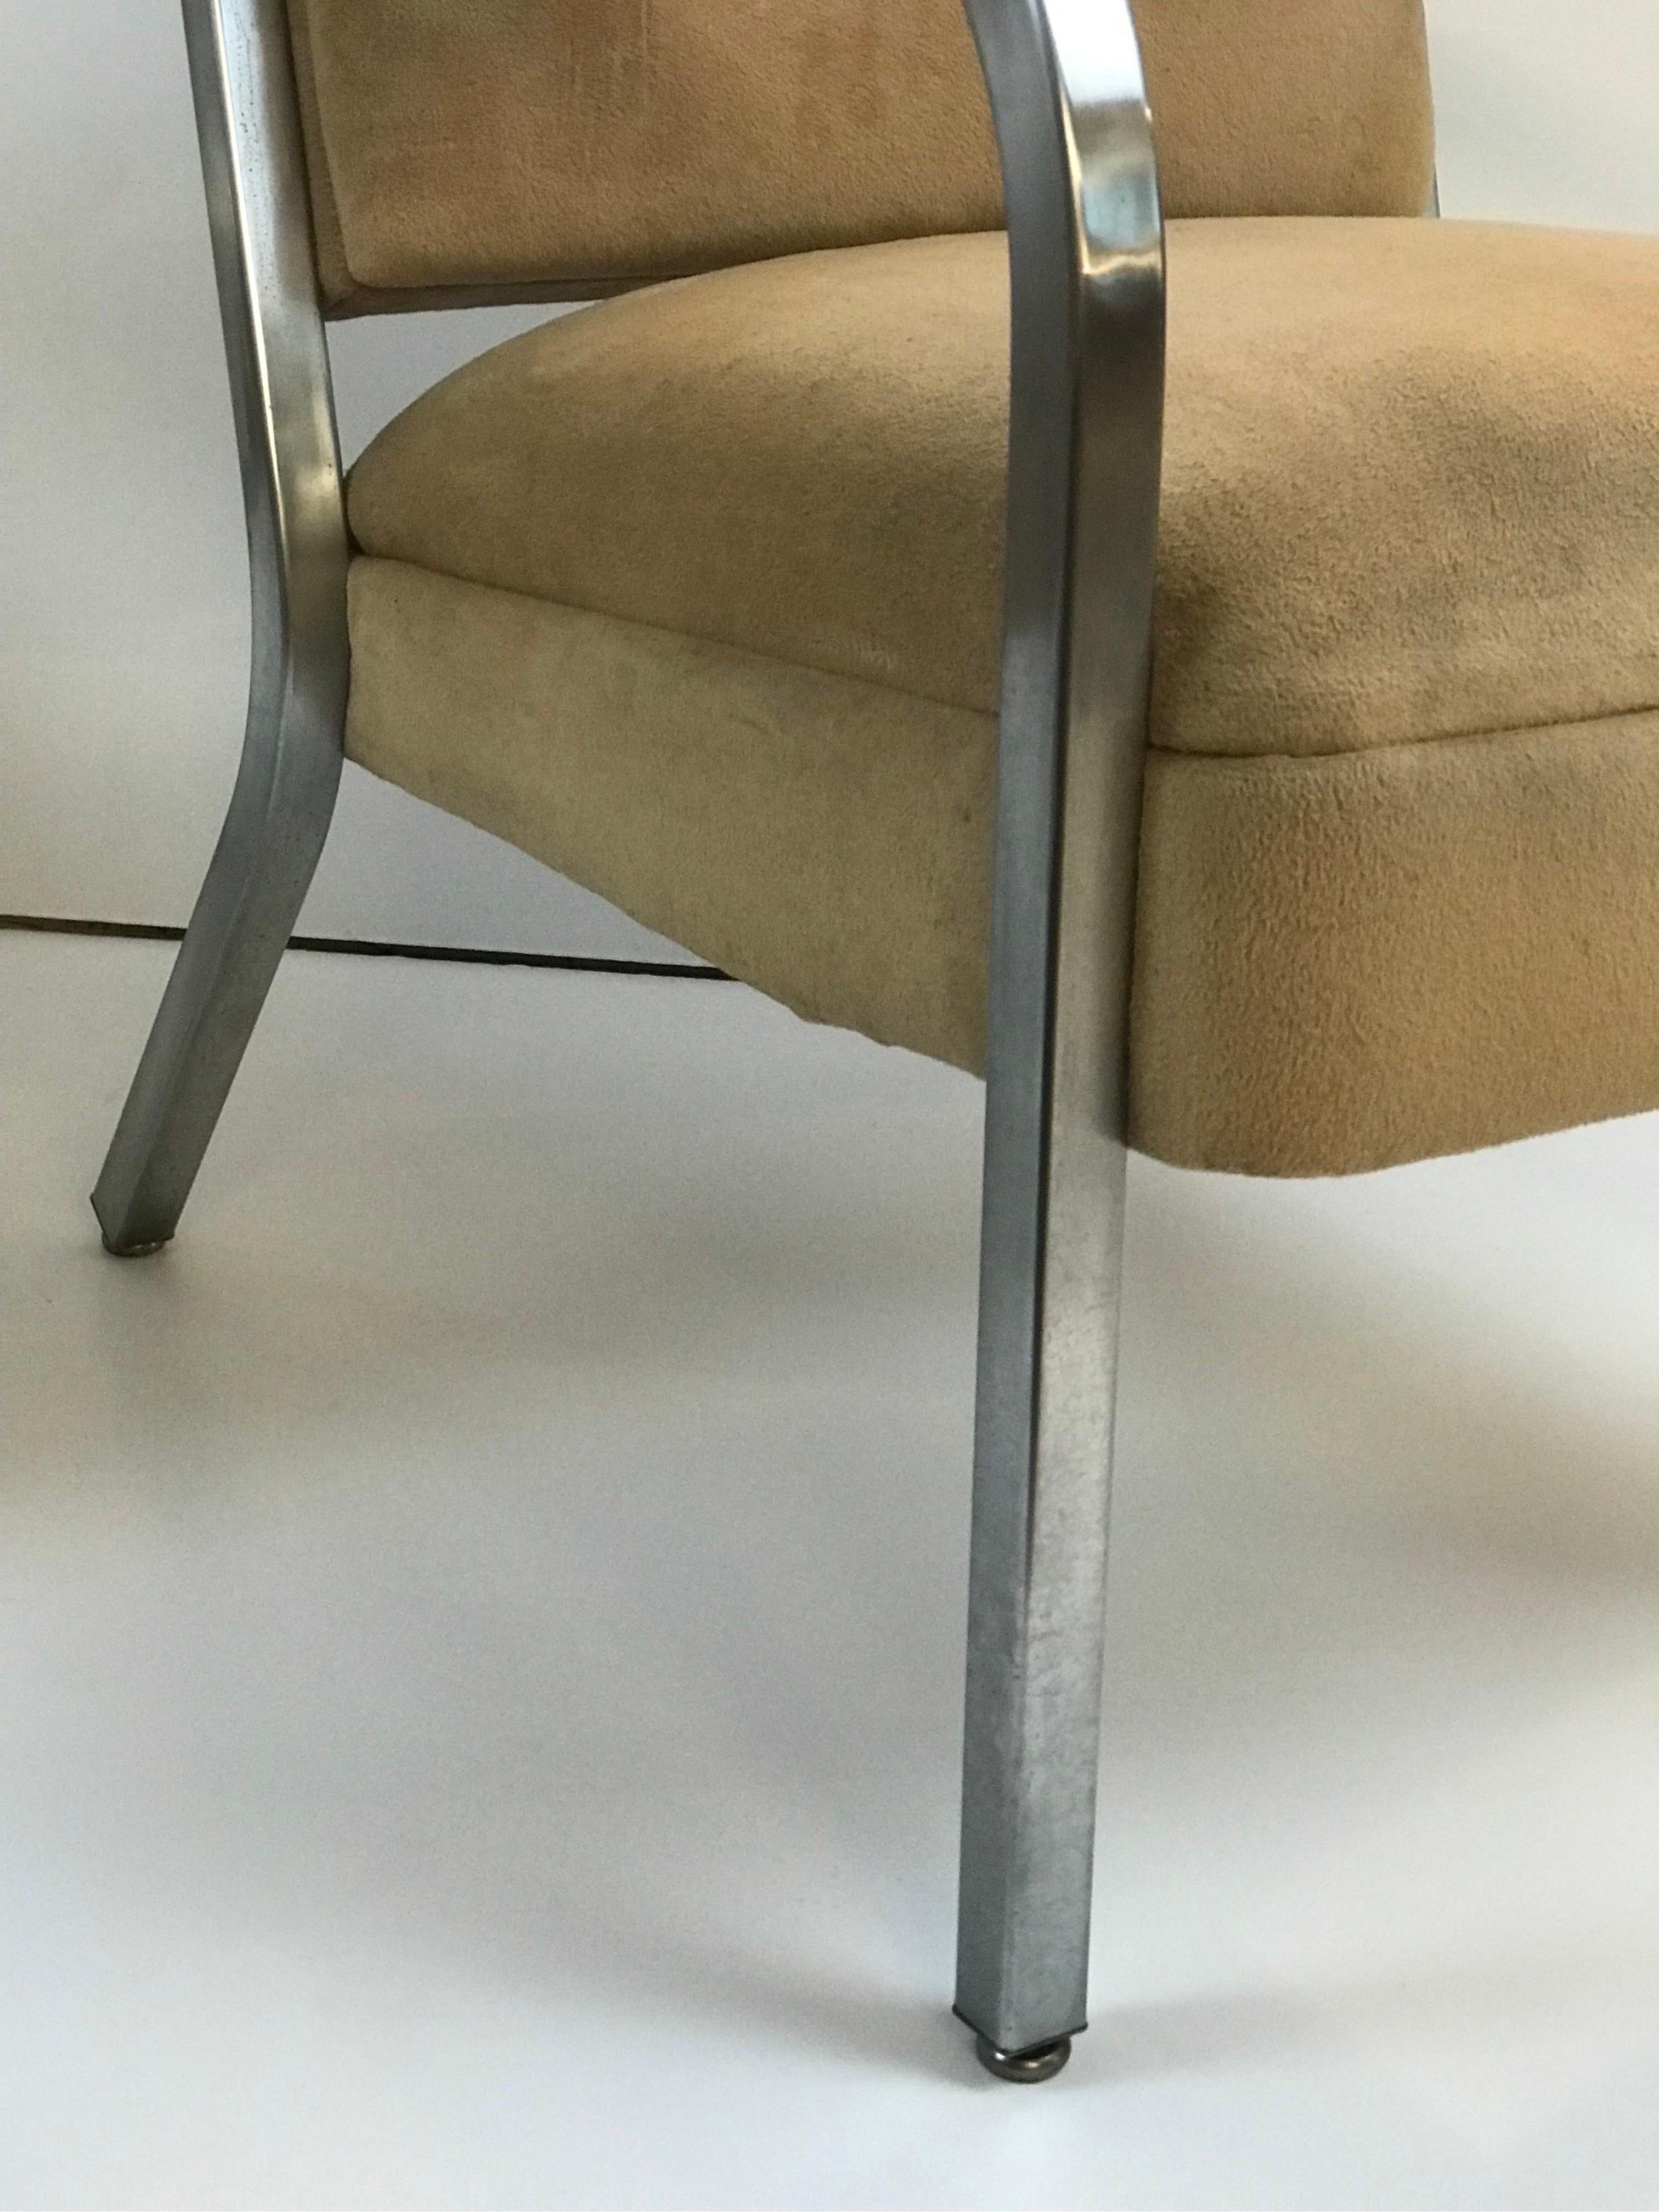 A Pair of Petite Square Tubing 1960's Club Chairs IMO Shaw Walker or Goodform,   5